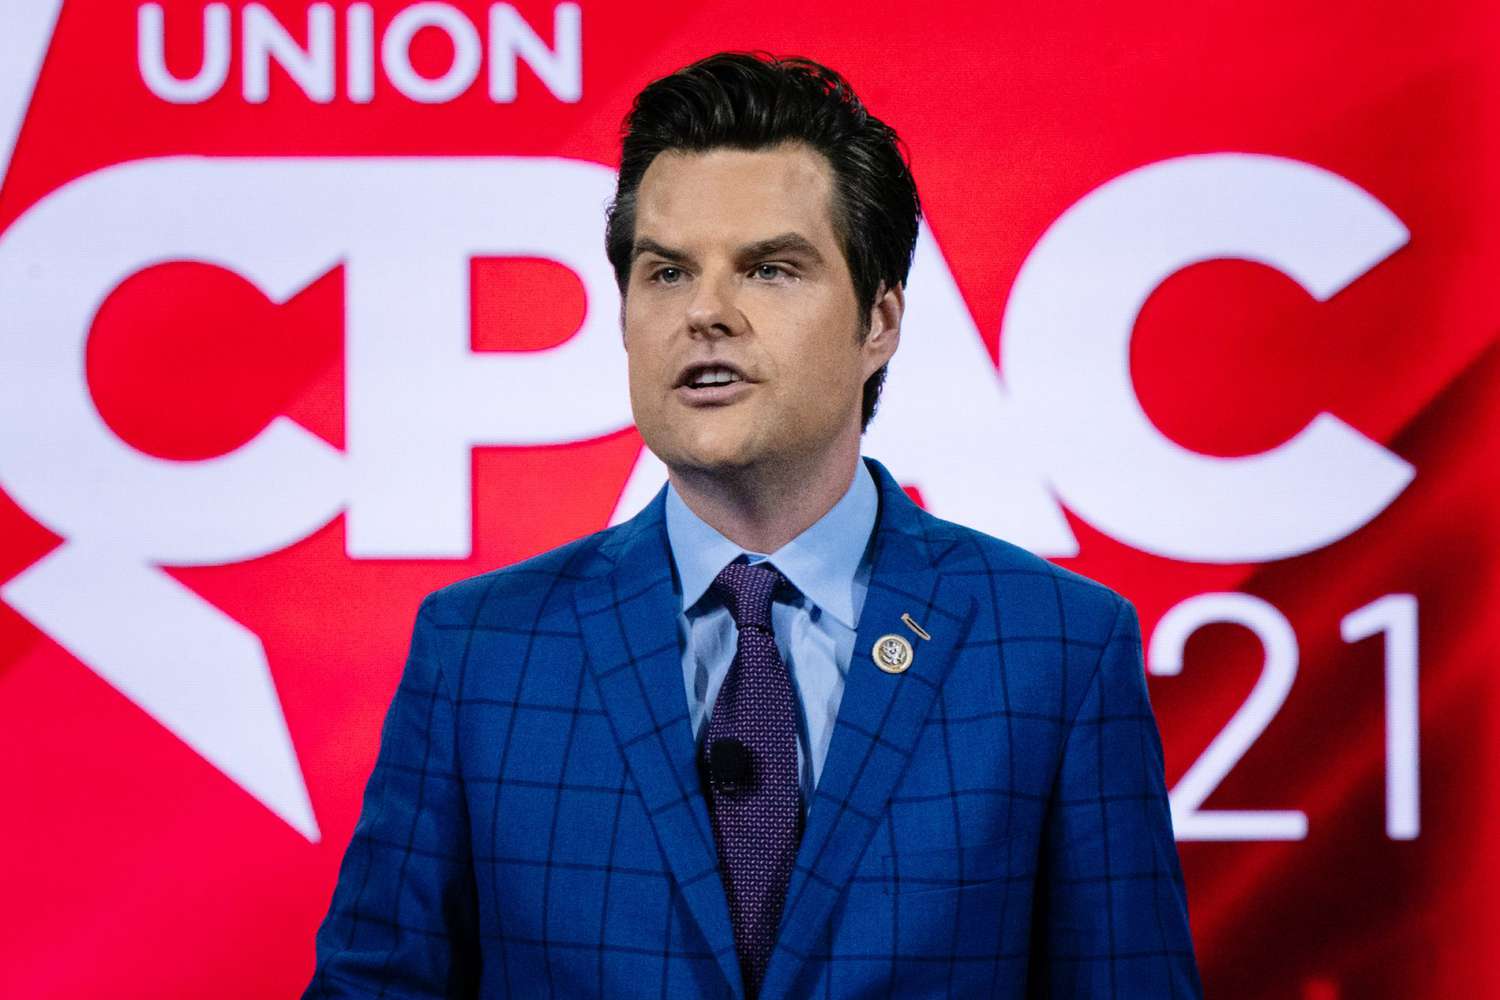 Representative Matt Gaetz, a Republican from Florida, speaks during the Conservative Political Action Conference (CPAC) in Orlando, Florida, U.S., on Friday, Feb. 26, 2021